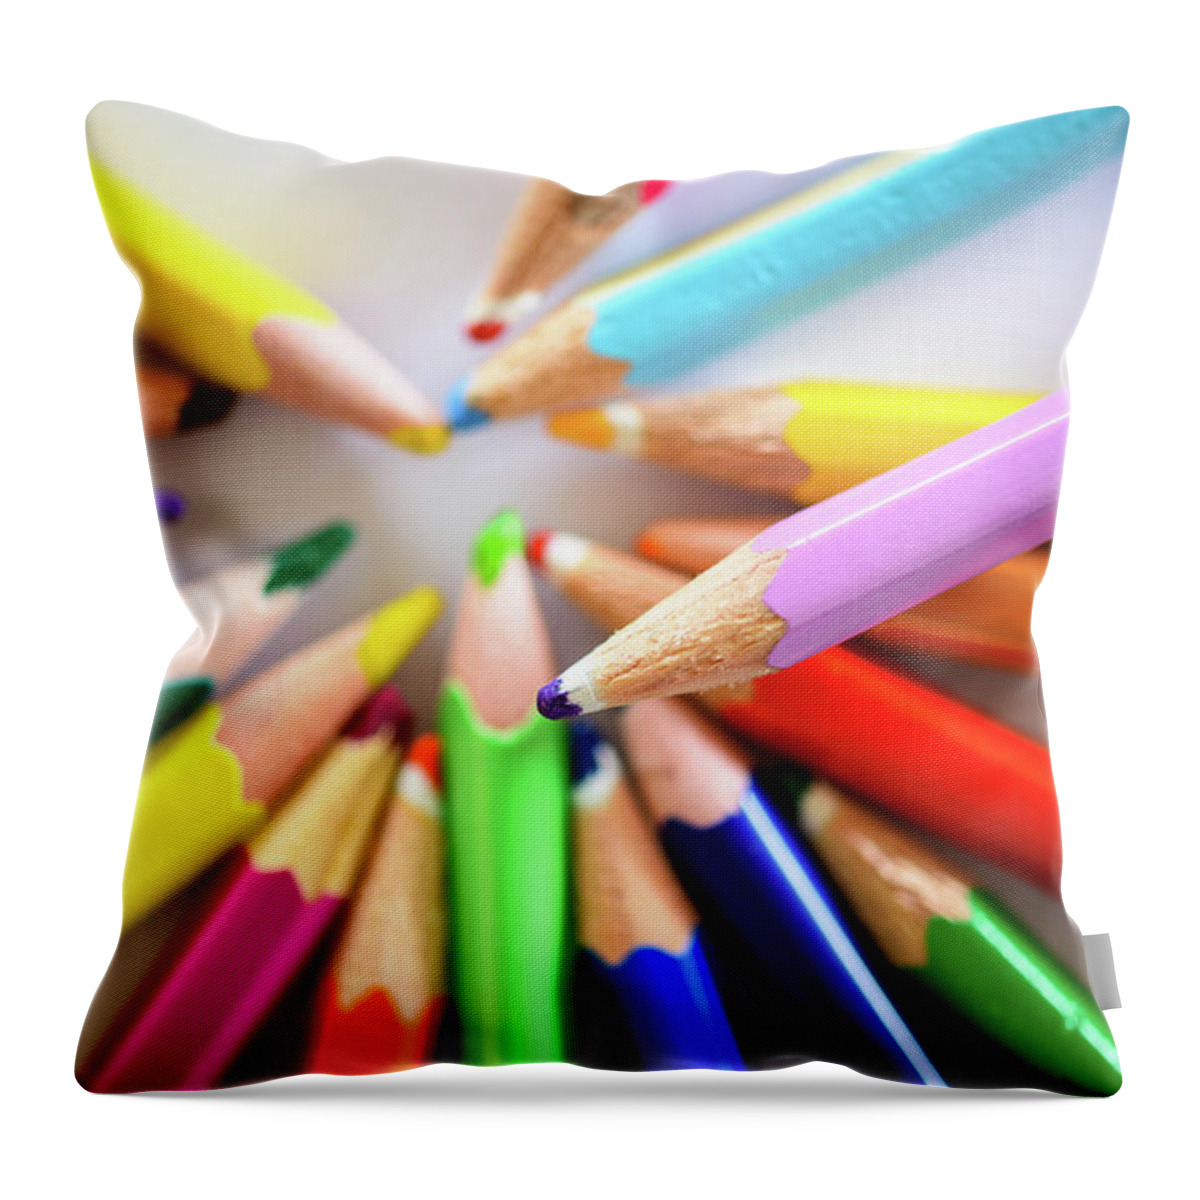 Background Throw Pillow featuring the photograph Colored pencils by Nicola Simeoni